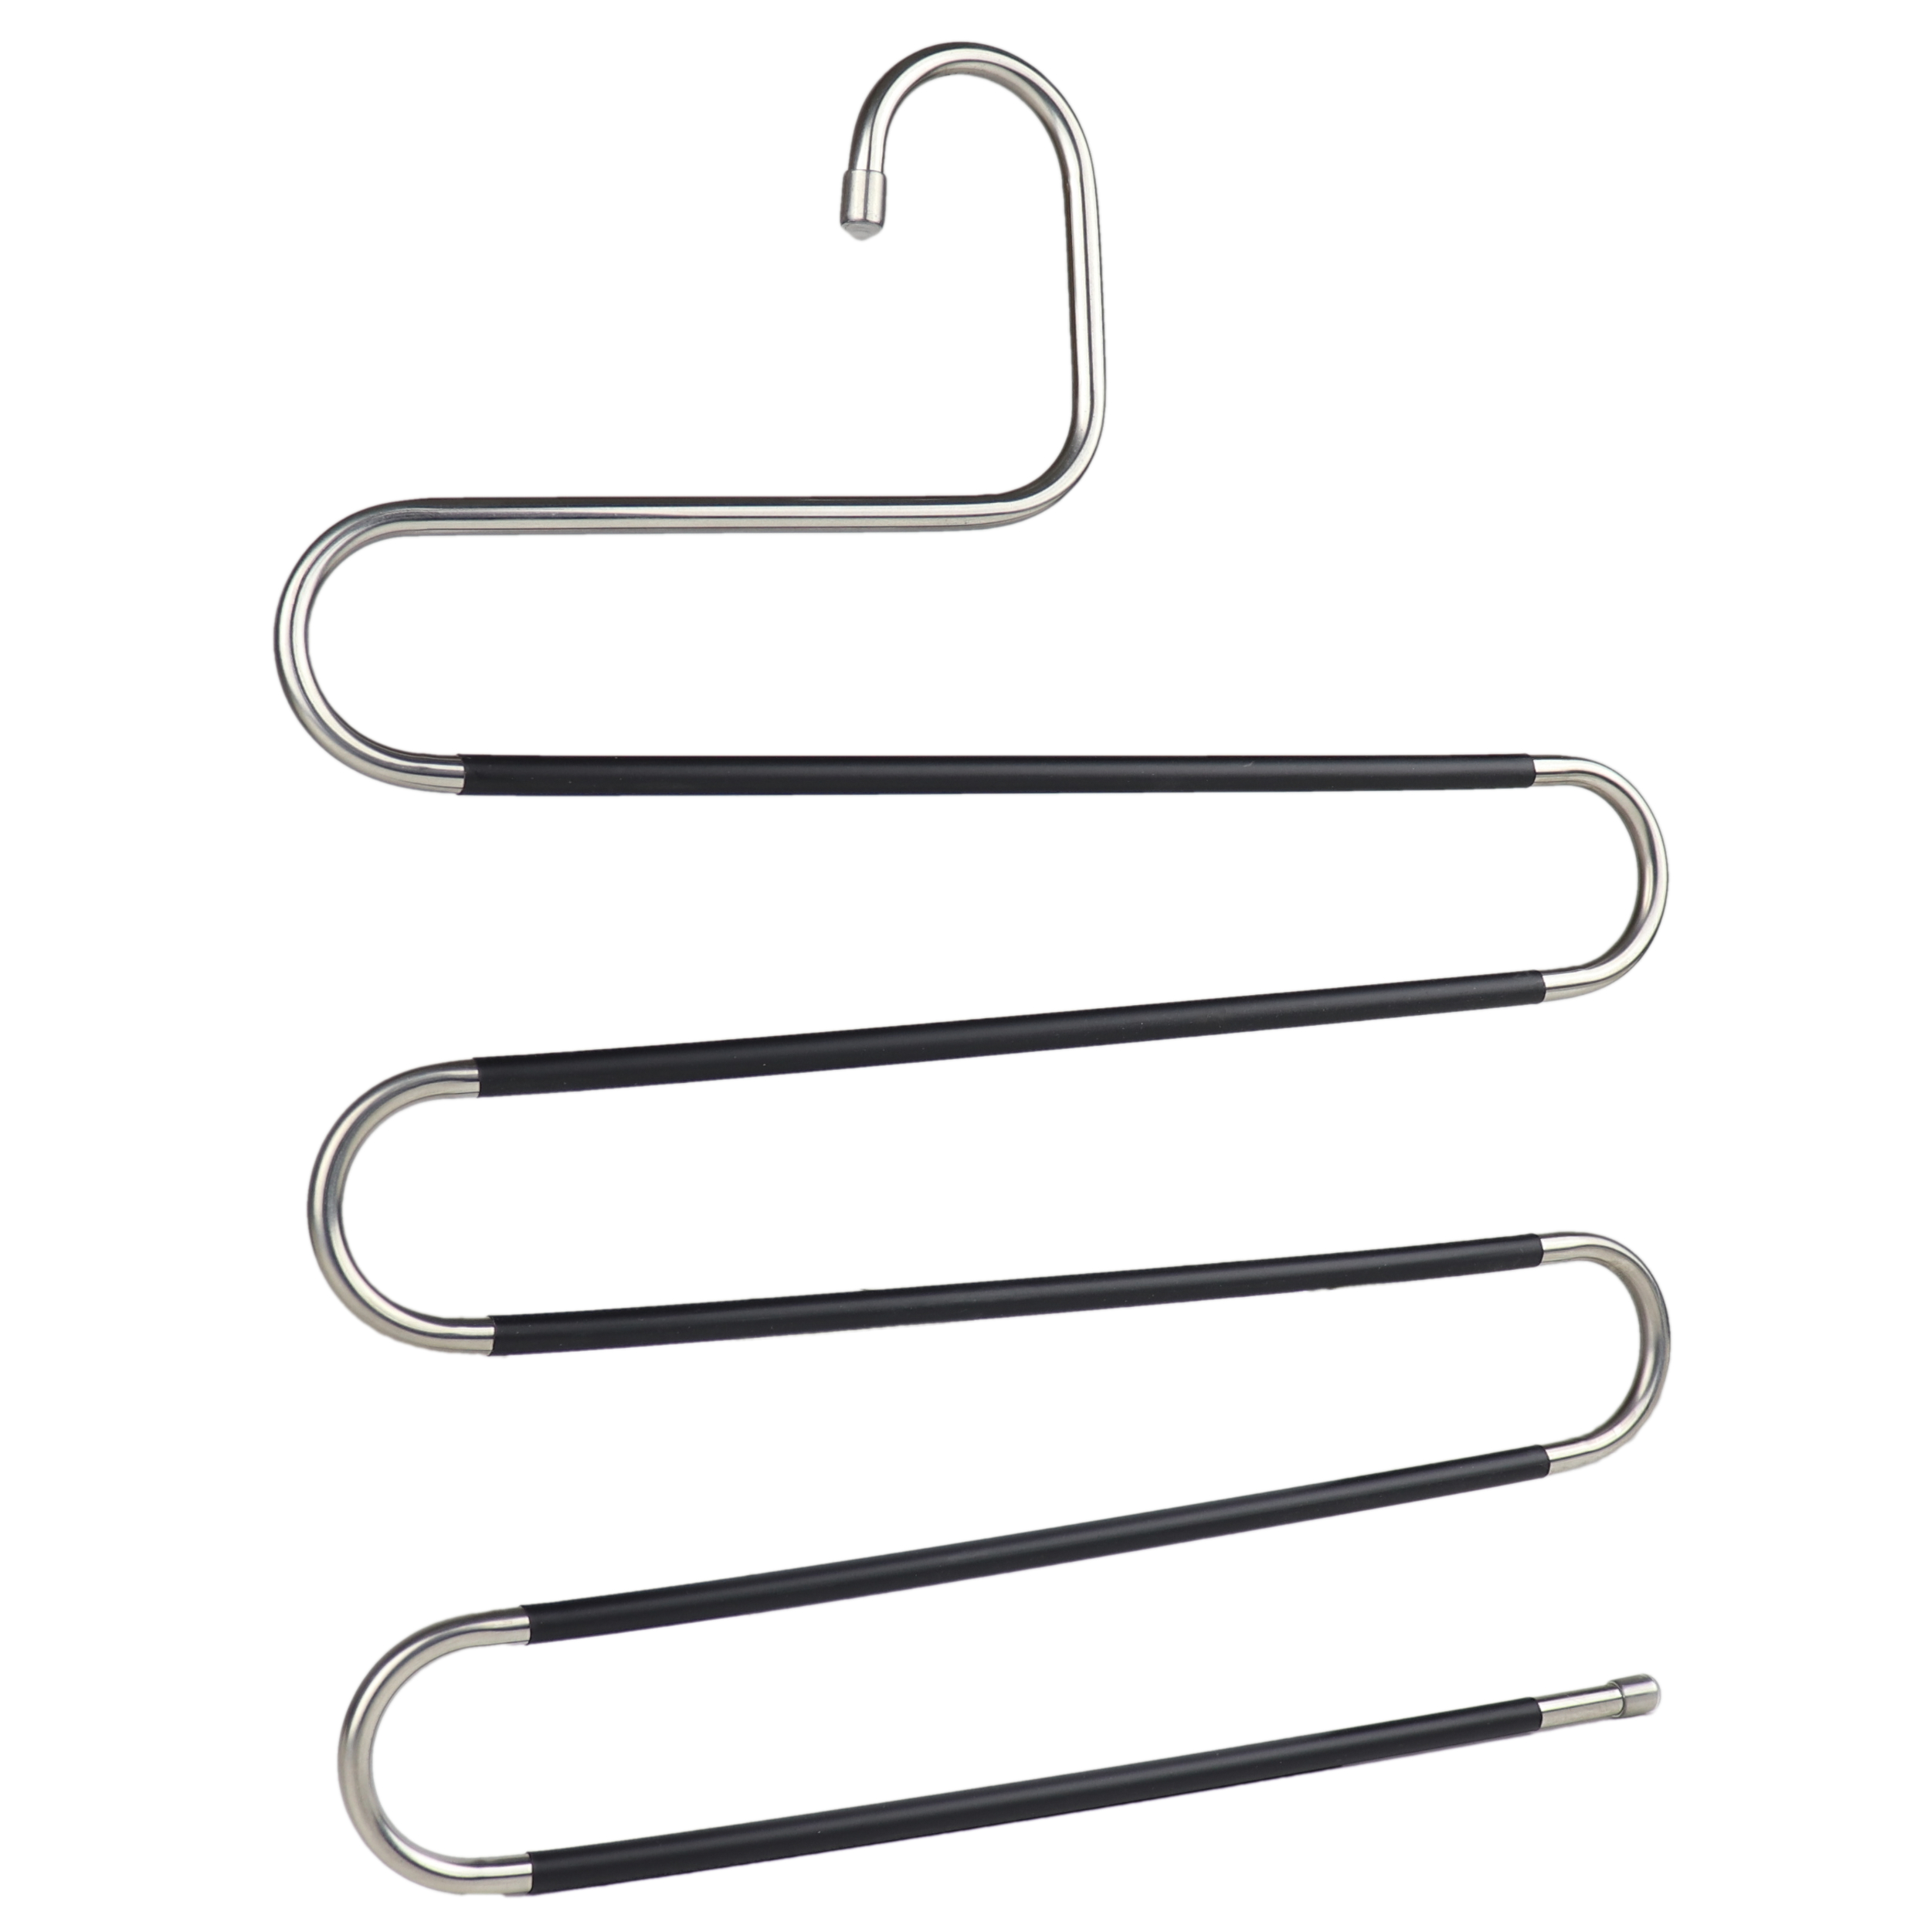 2 Pack Trouser Hanger Space Saving 5 In 1 Stainless Steel Magic Hanger Organiser for Trousers Scarves Jeans Clothes Towels With ABS Plastic Coating 